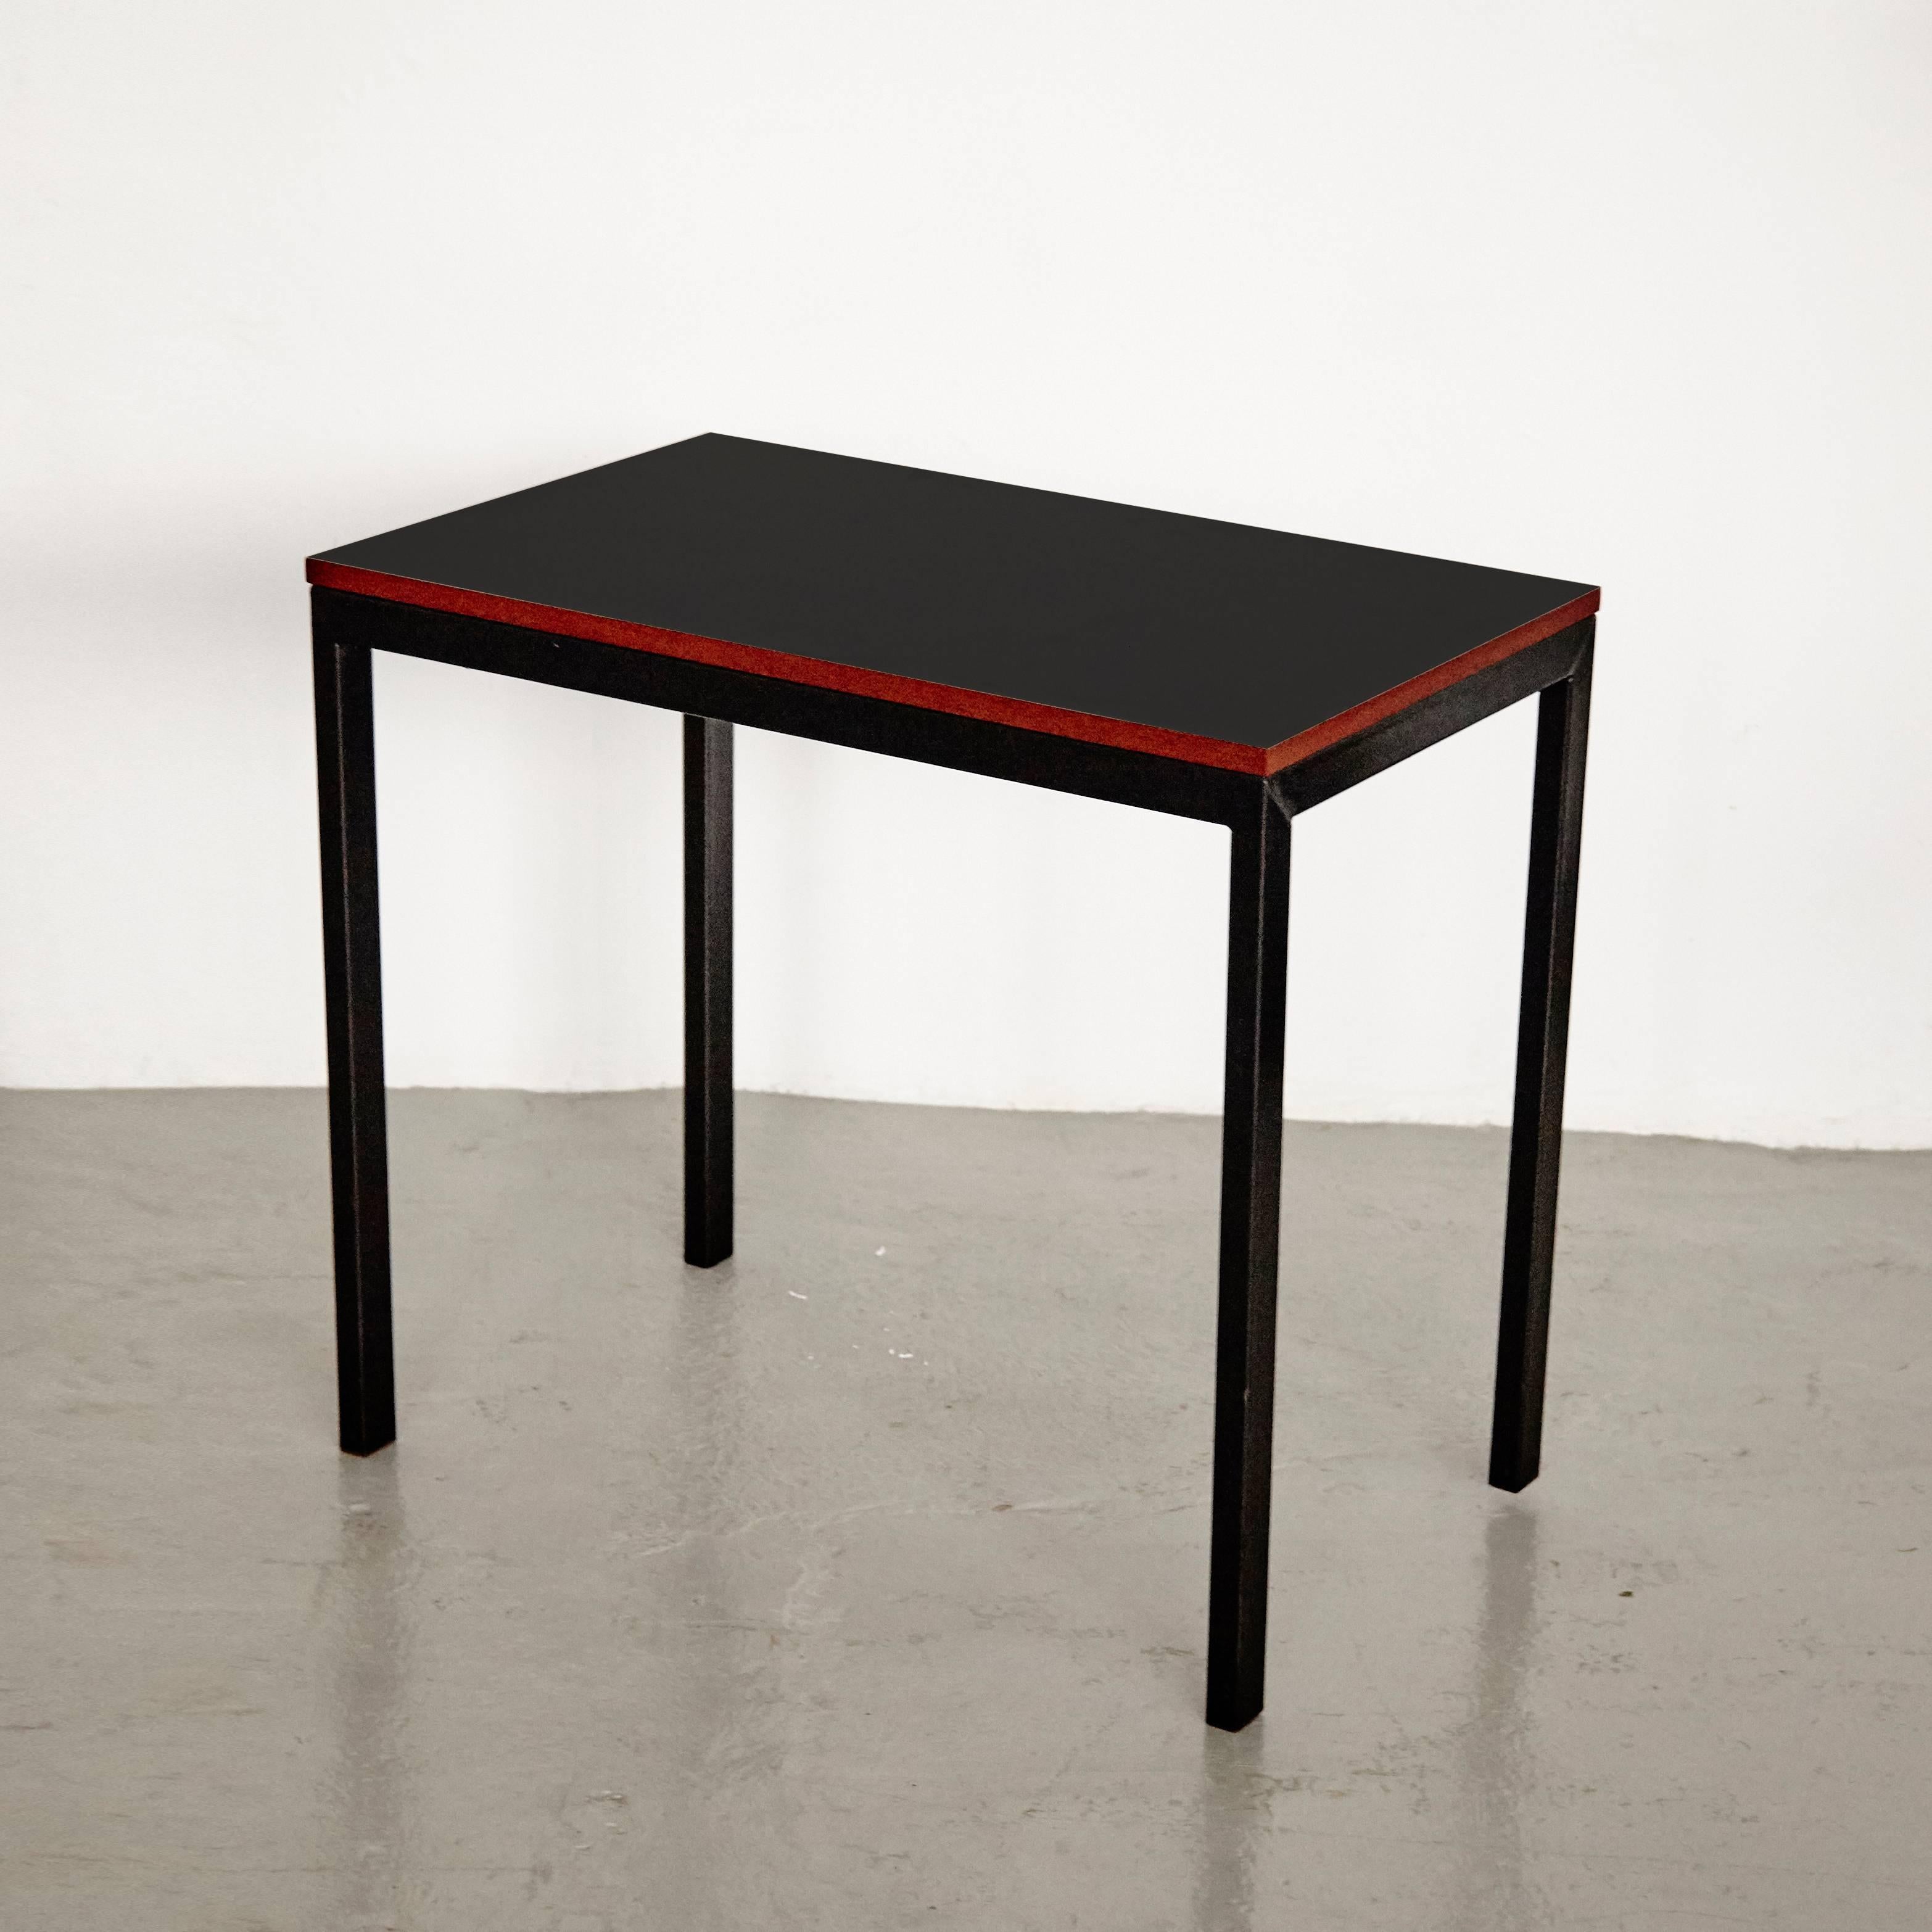 Console designed by Charlotte Perriand, circa 1958.
Manufactured in France, circa 1958.

Black laminated plastic-covered plywood, painted steel and red moulded plastic.

Drawer moulded with Modele Charlotte Perriand or Brevete S.G.D.G.
Some